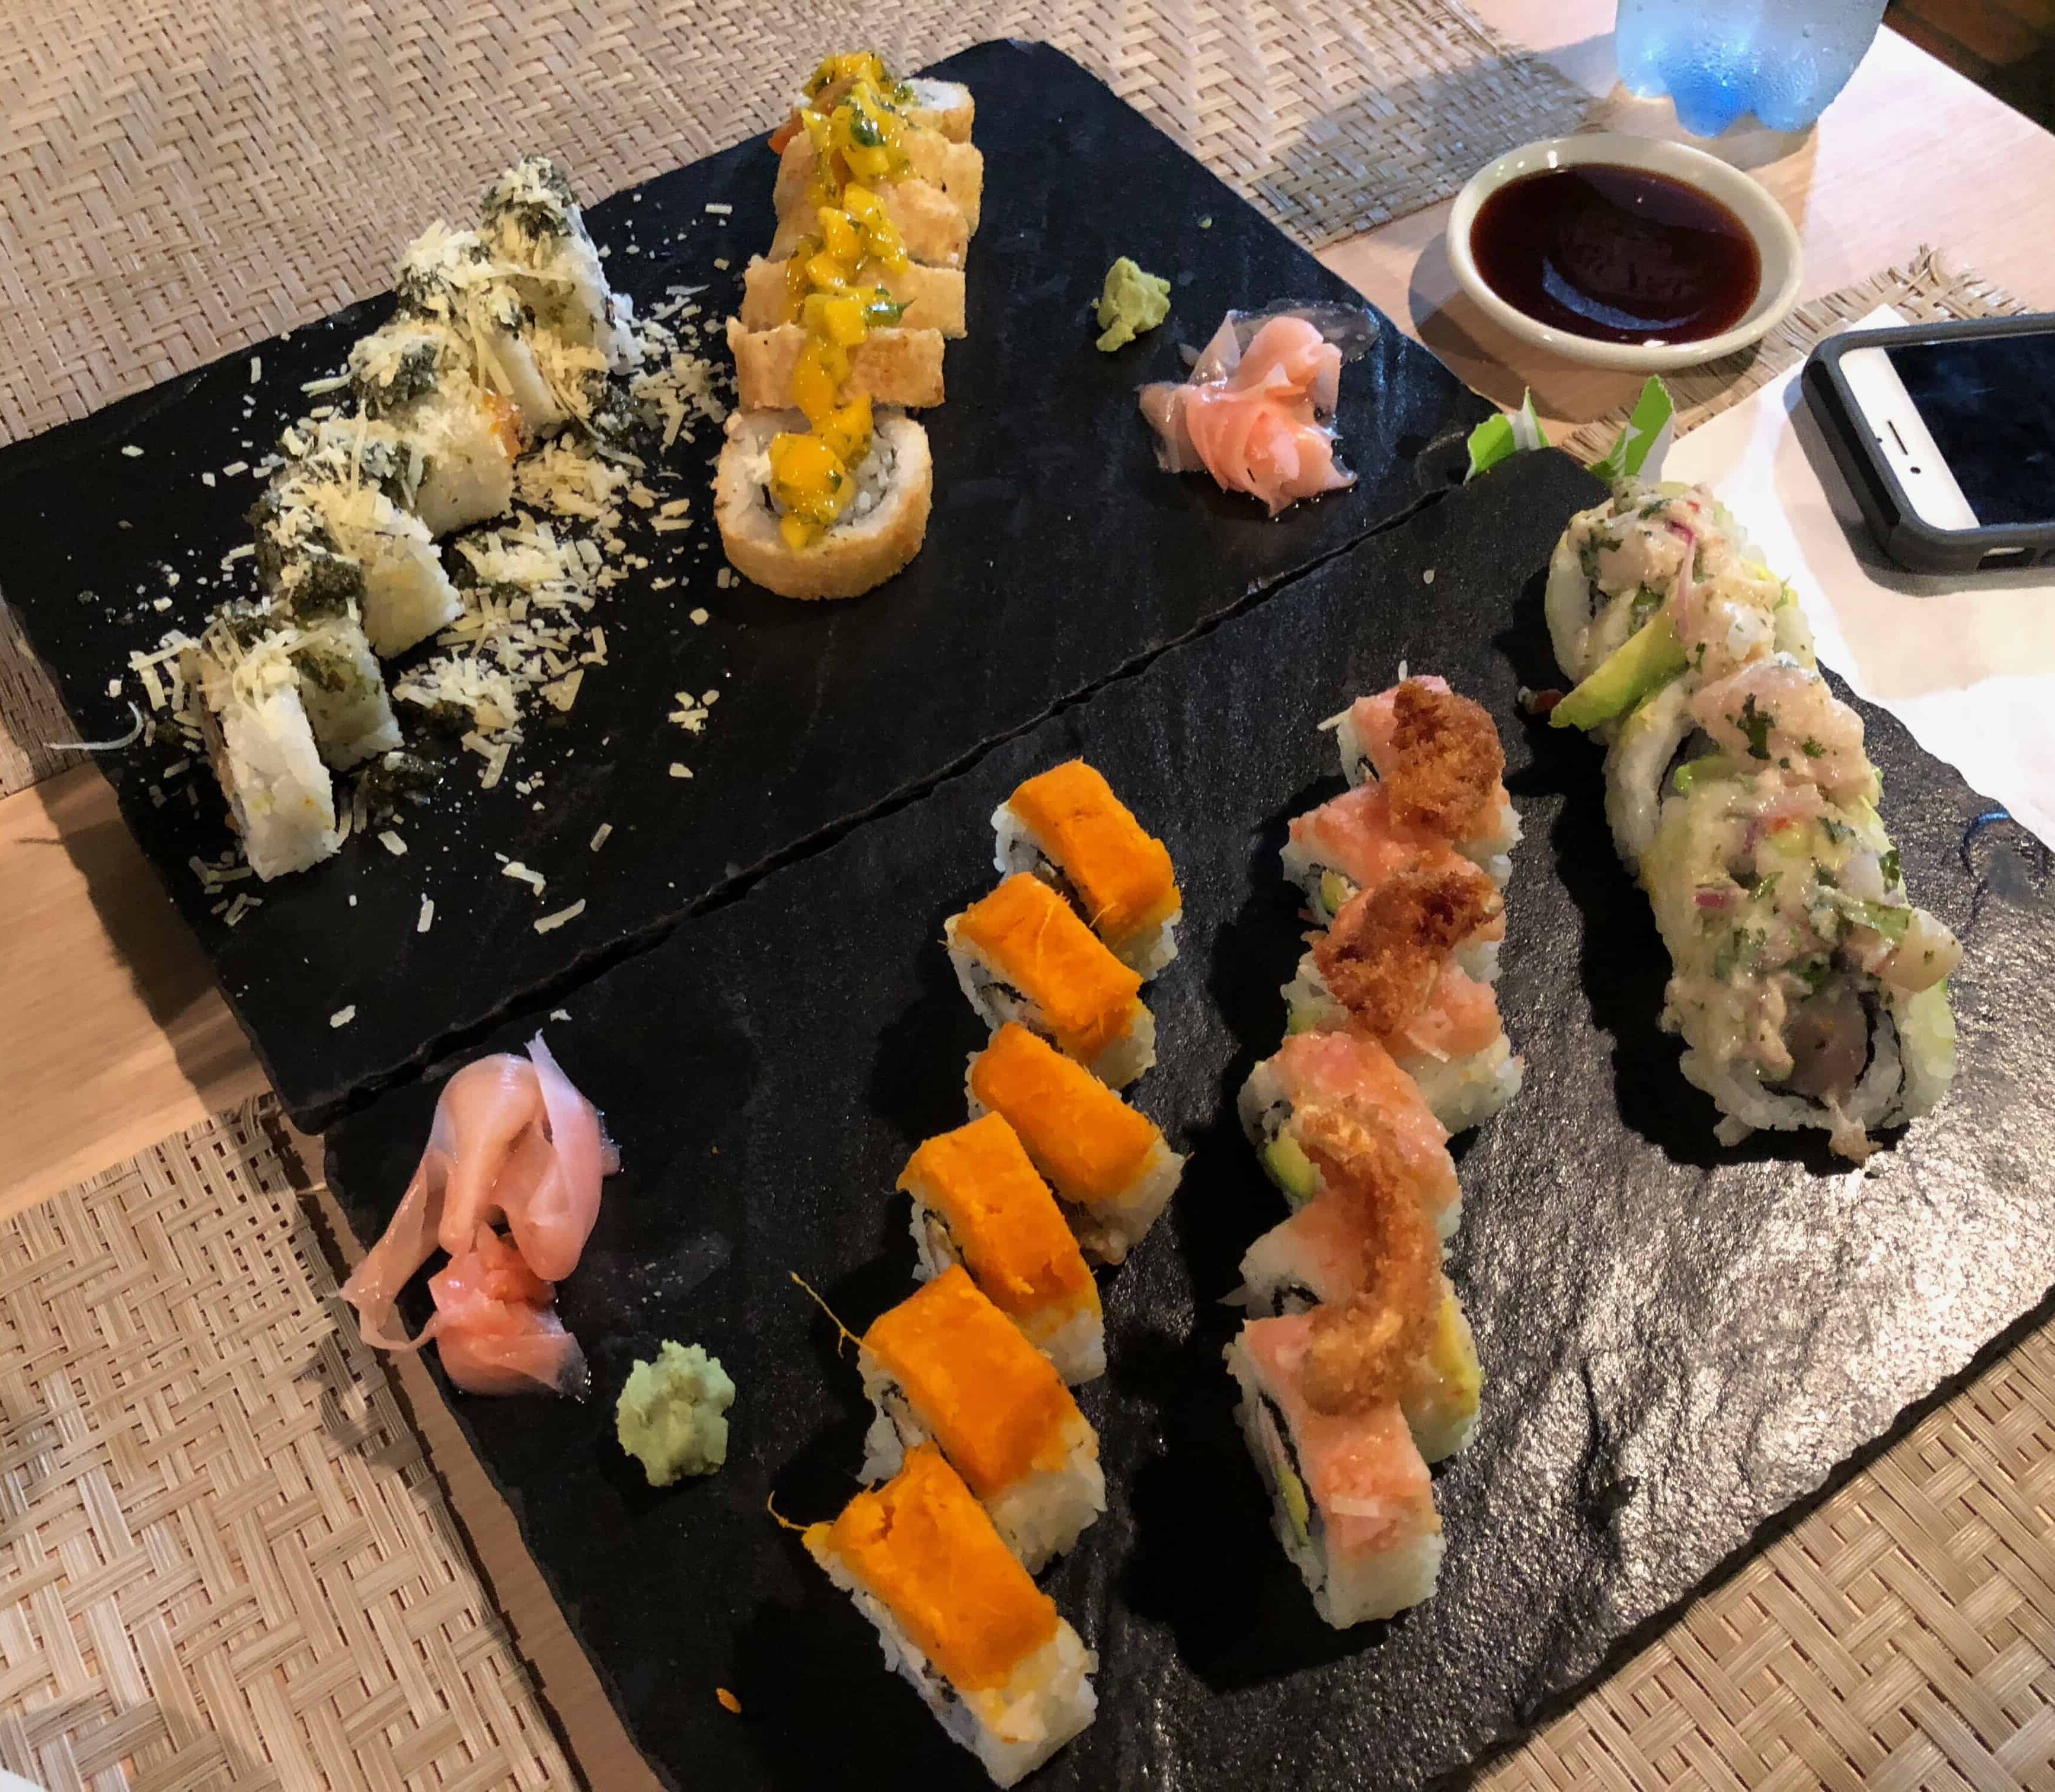 Sushi rolls at Sushi Green at Jardín Plaza in Cali, Colombia